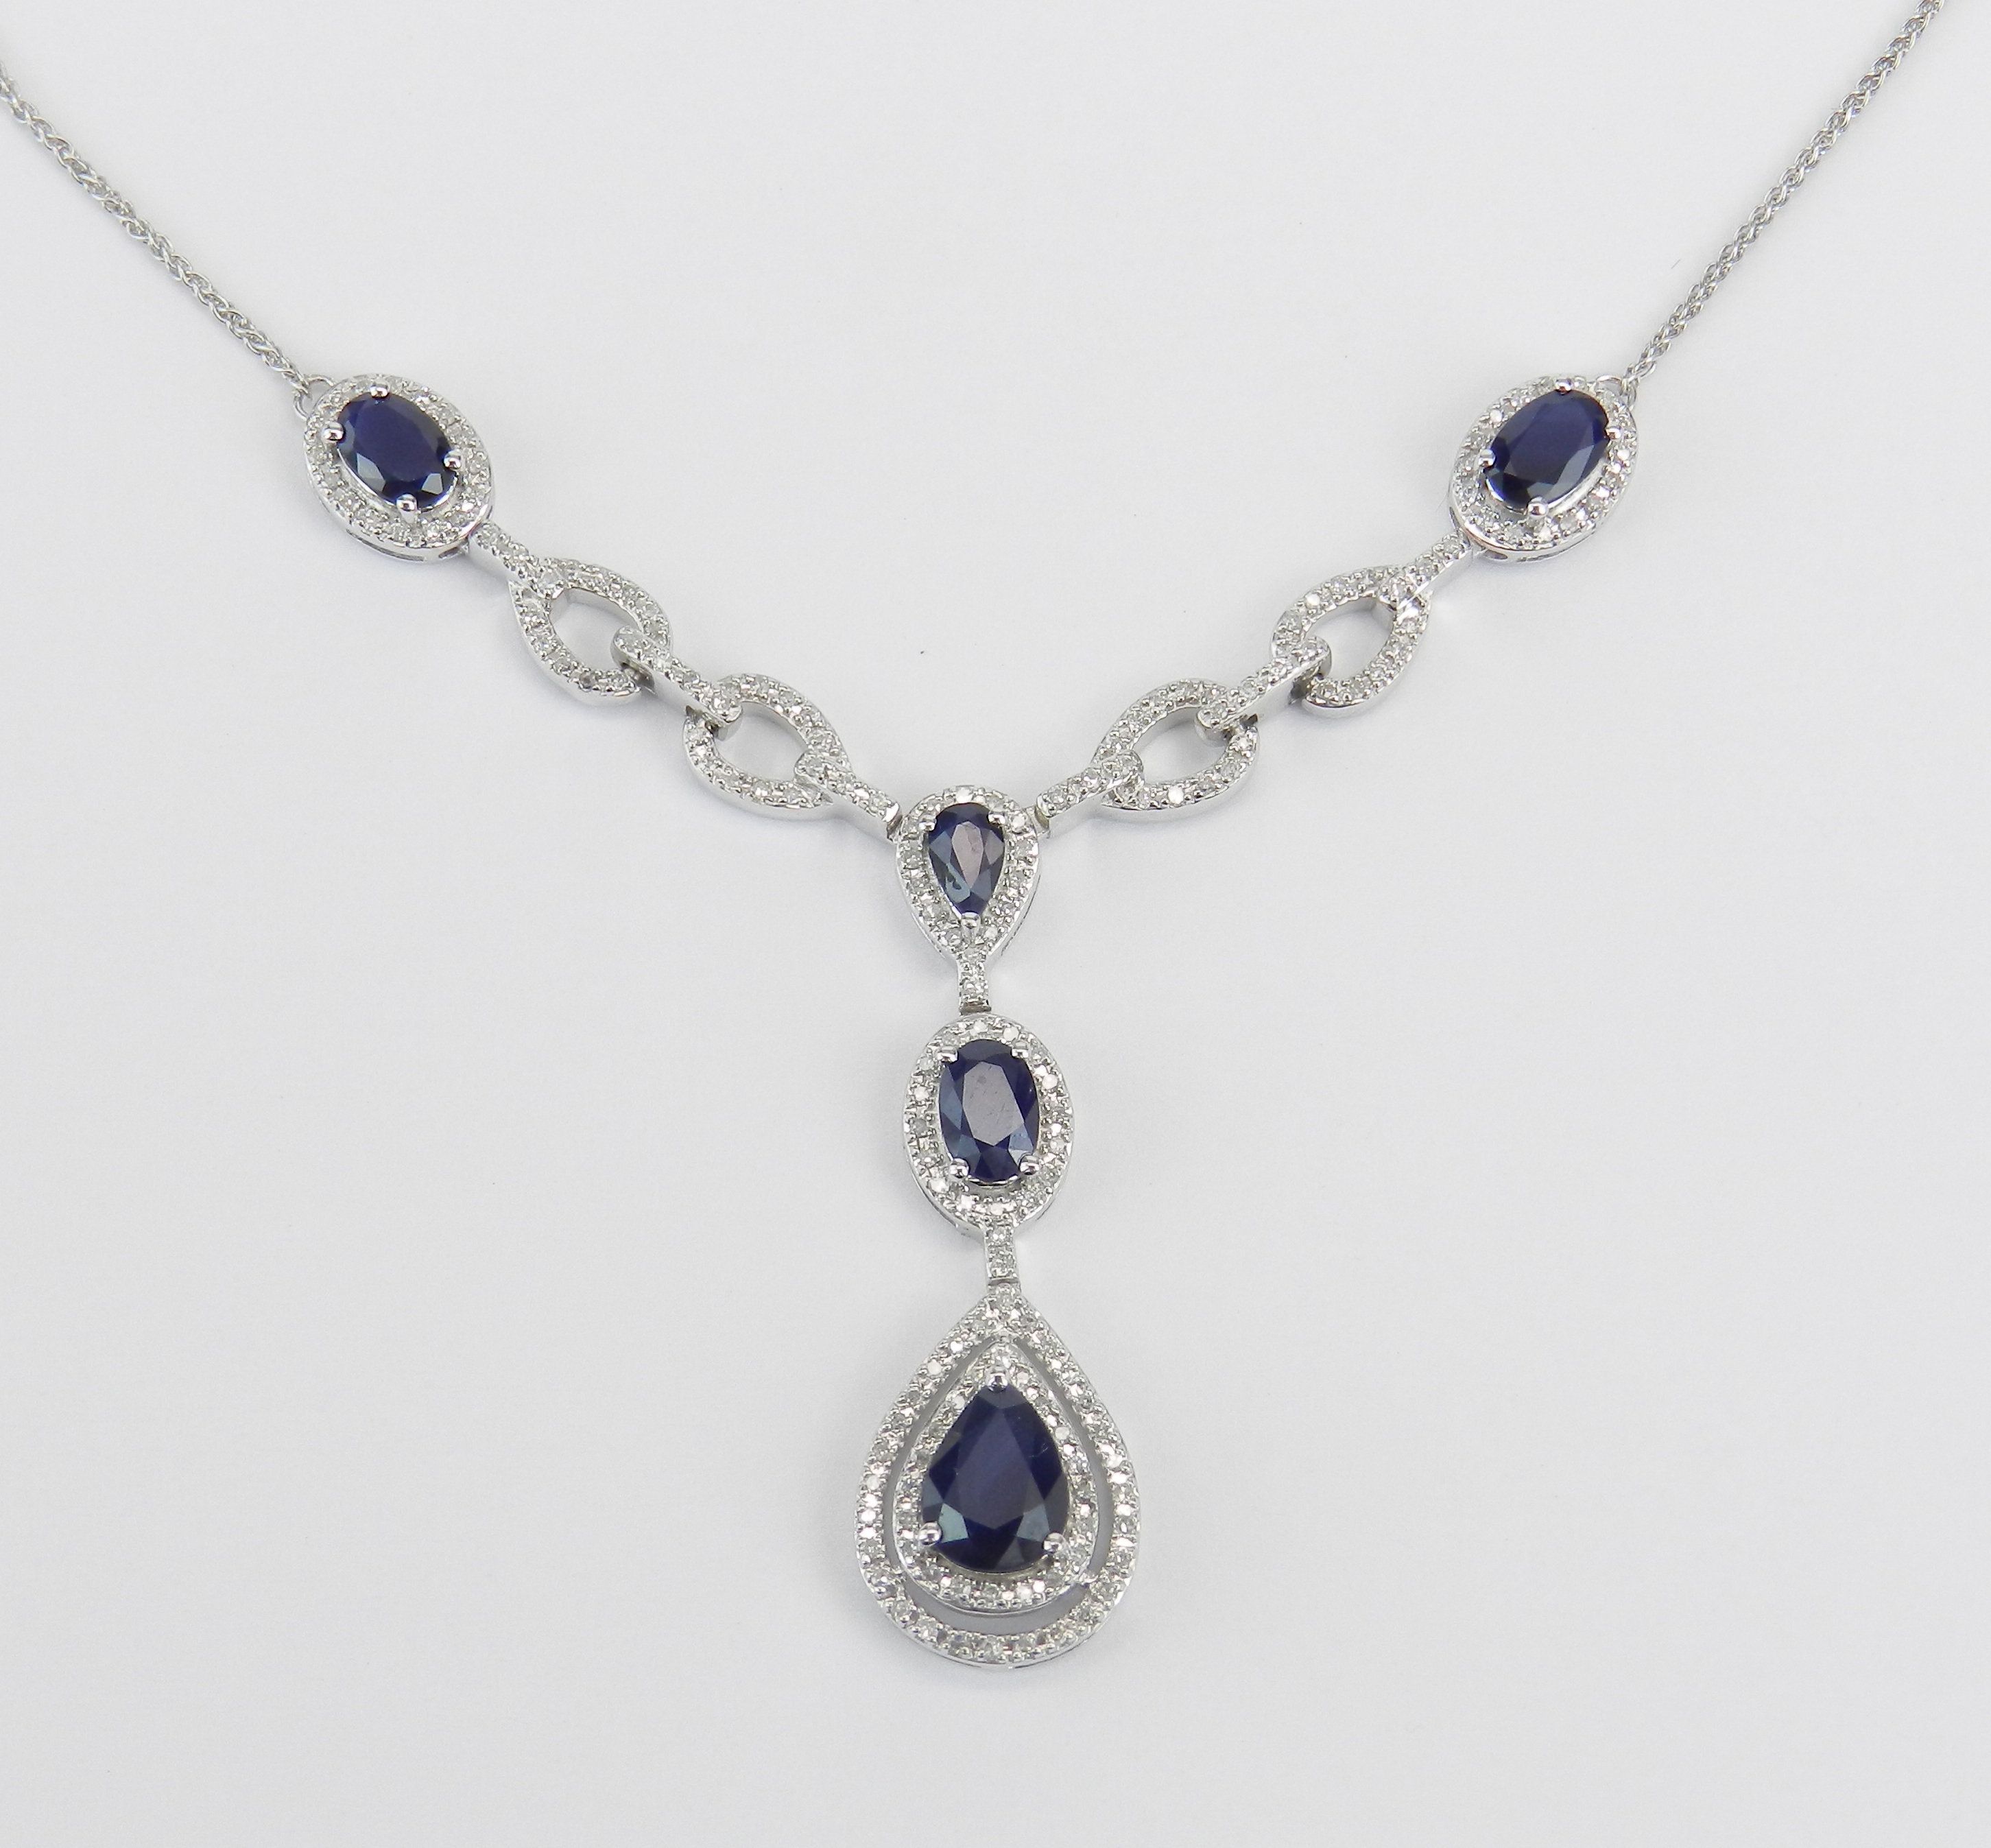 Sapphire And Diamond Lariat Necklace, 14k White Gold Necklace, September  Birthstone Necklace, Sapphire Halo Necklace Intended For Current Lariat Sapphire And Diamond Necklaces (View 3 of 25)